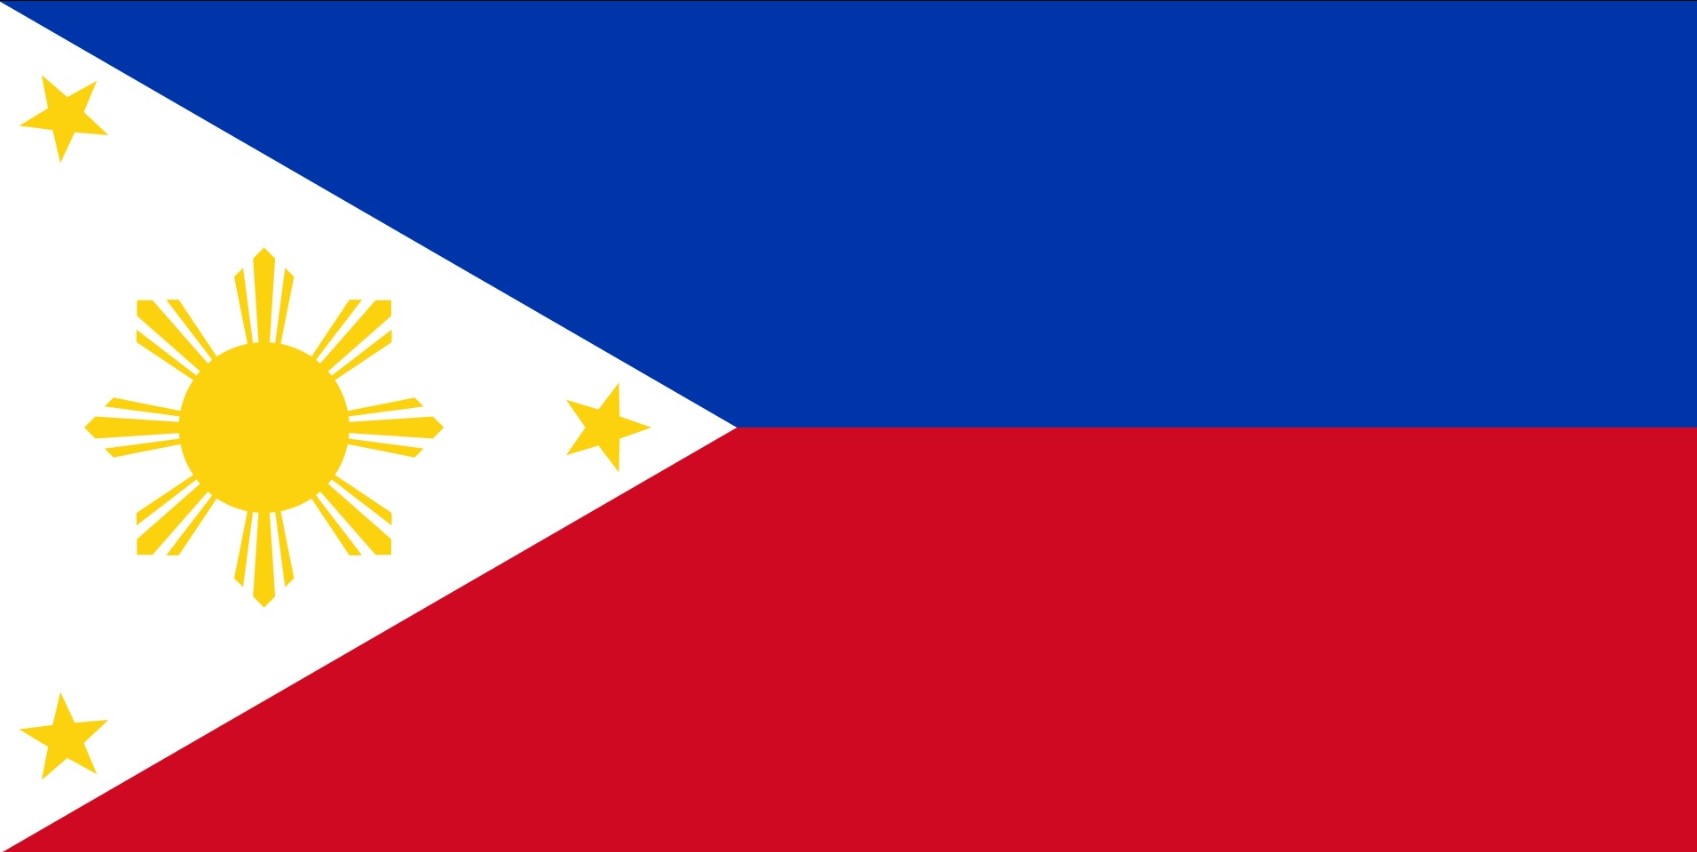 /000001a/pic/philippines+flag+01.jpg